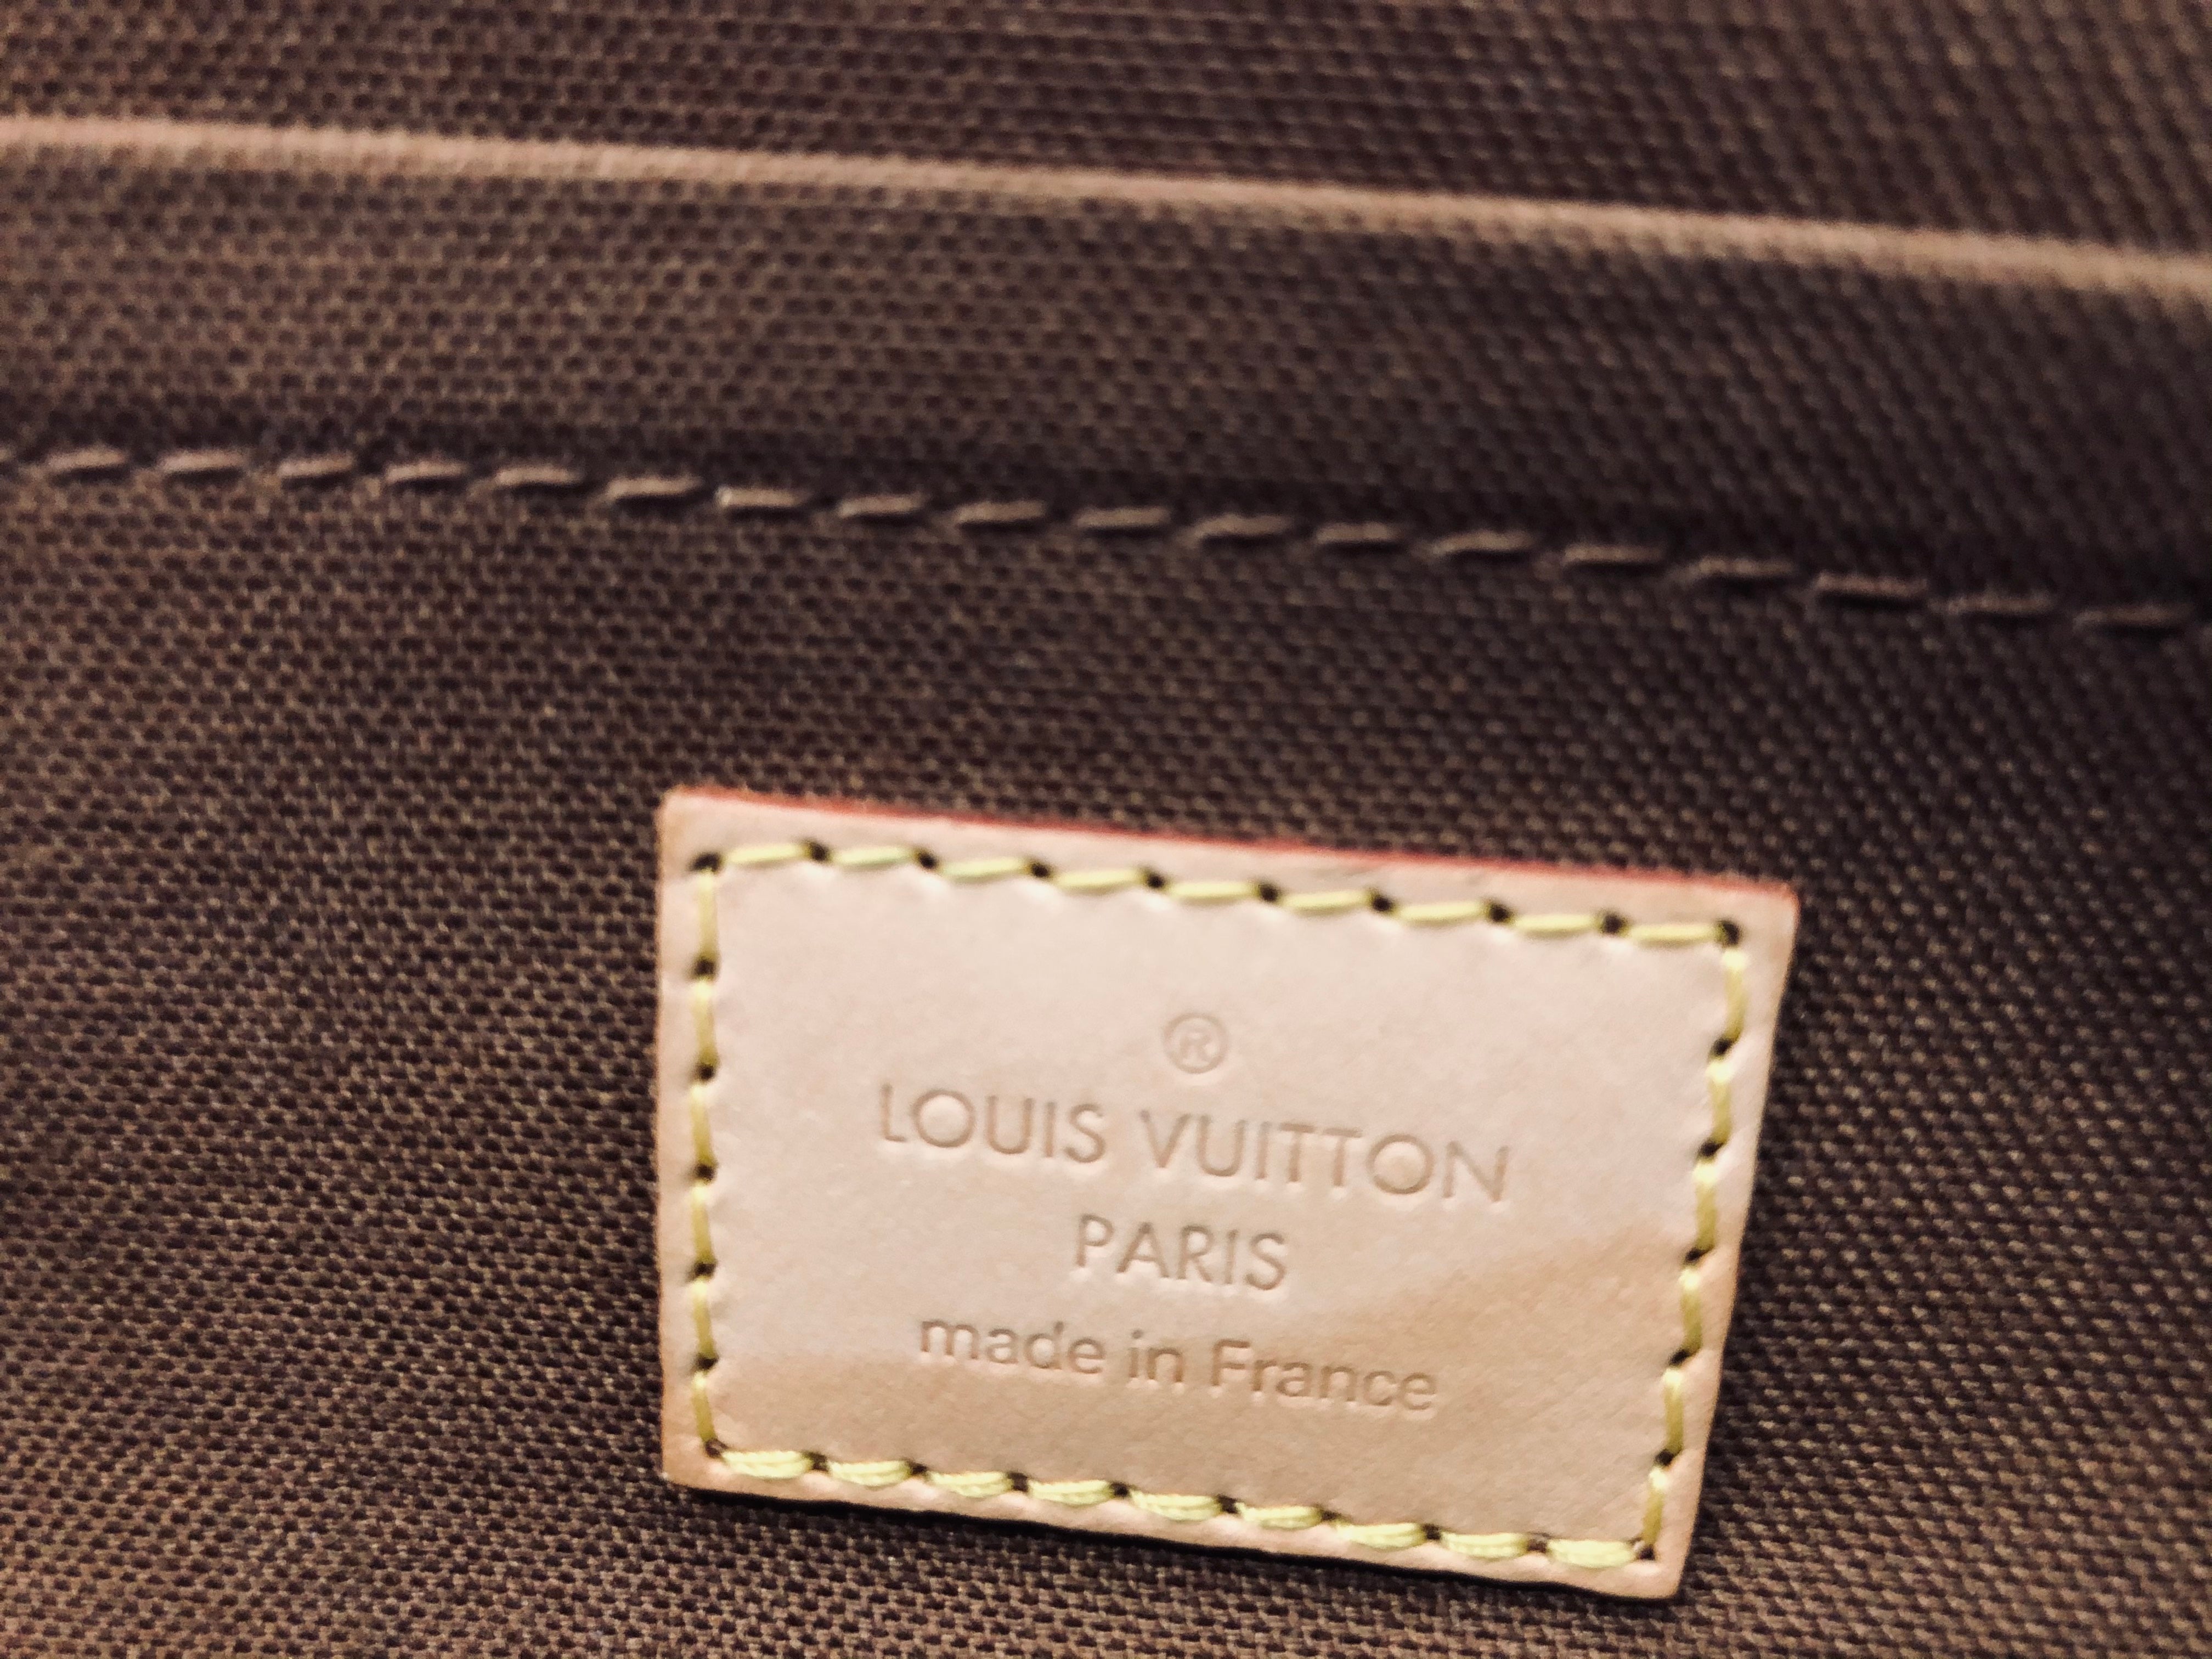 Limited Edition Louis Vuitton Lambskin Leather Riveting  Bag|White|Retail:$3,300